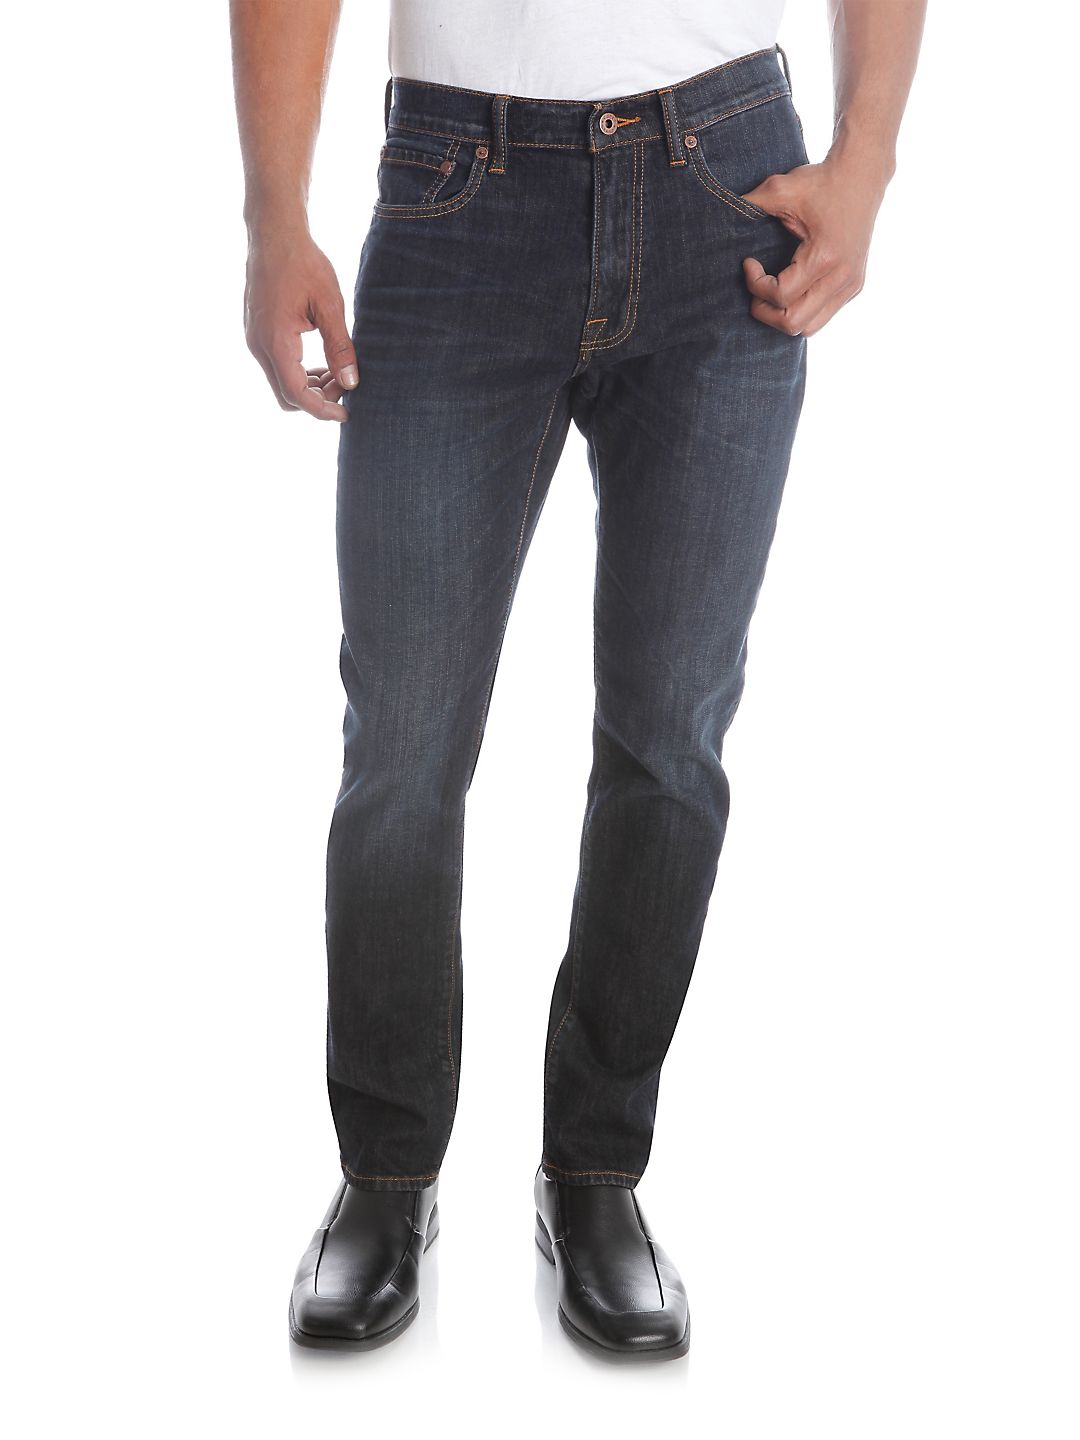 410 Athletic Fit Barite Wash Jeans - image 1 of 2